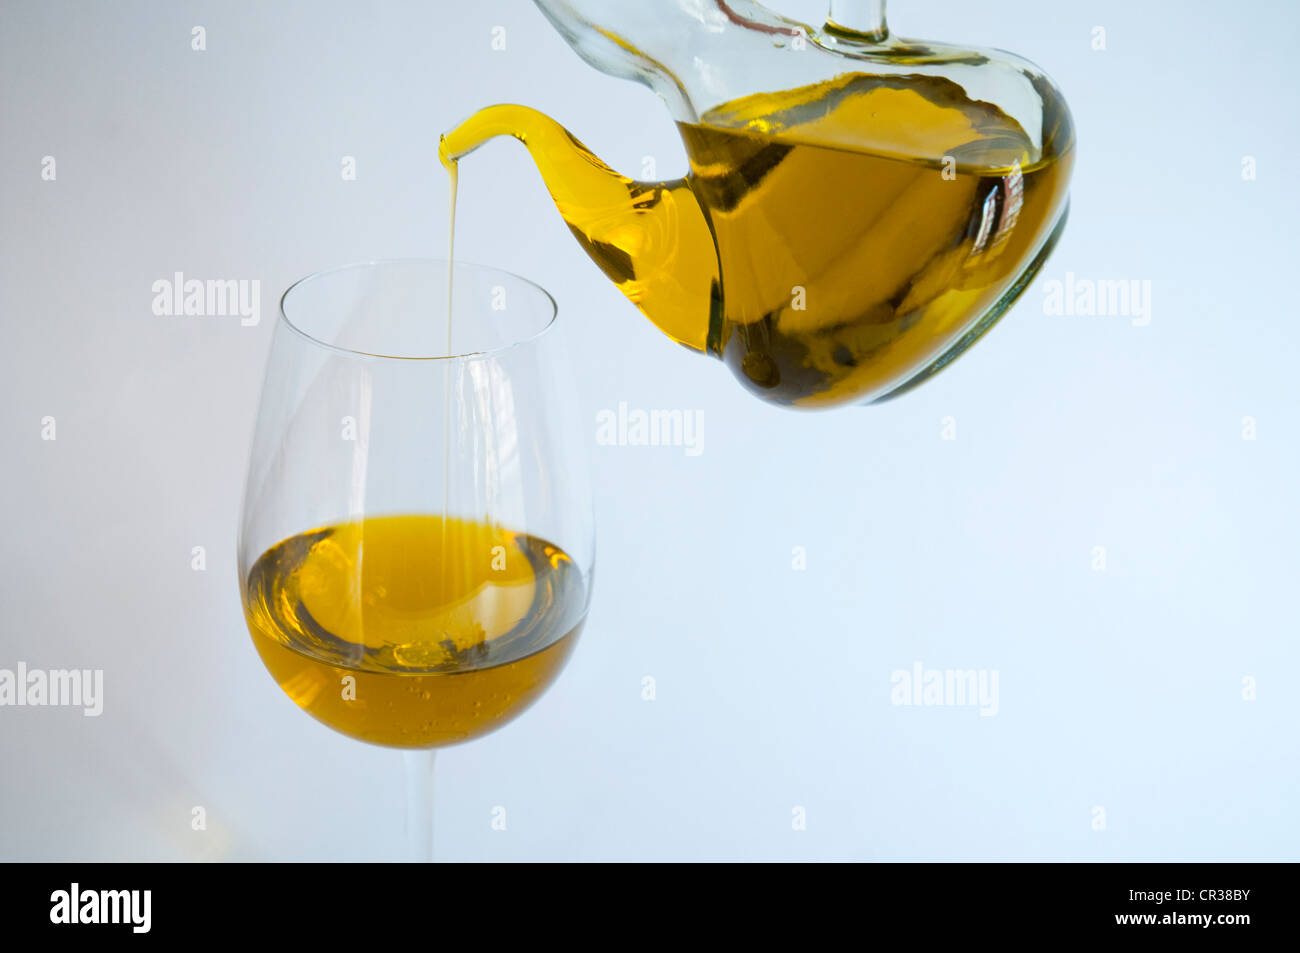 Oil bottle pouring olive oil in a glass. Close view. Stock Photo